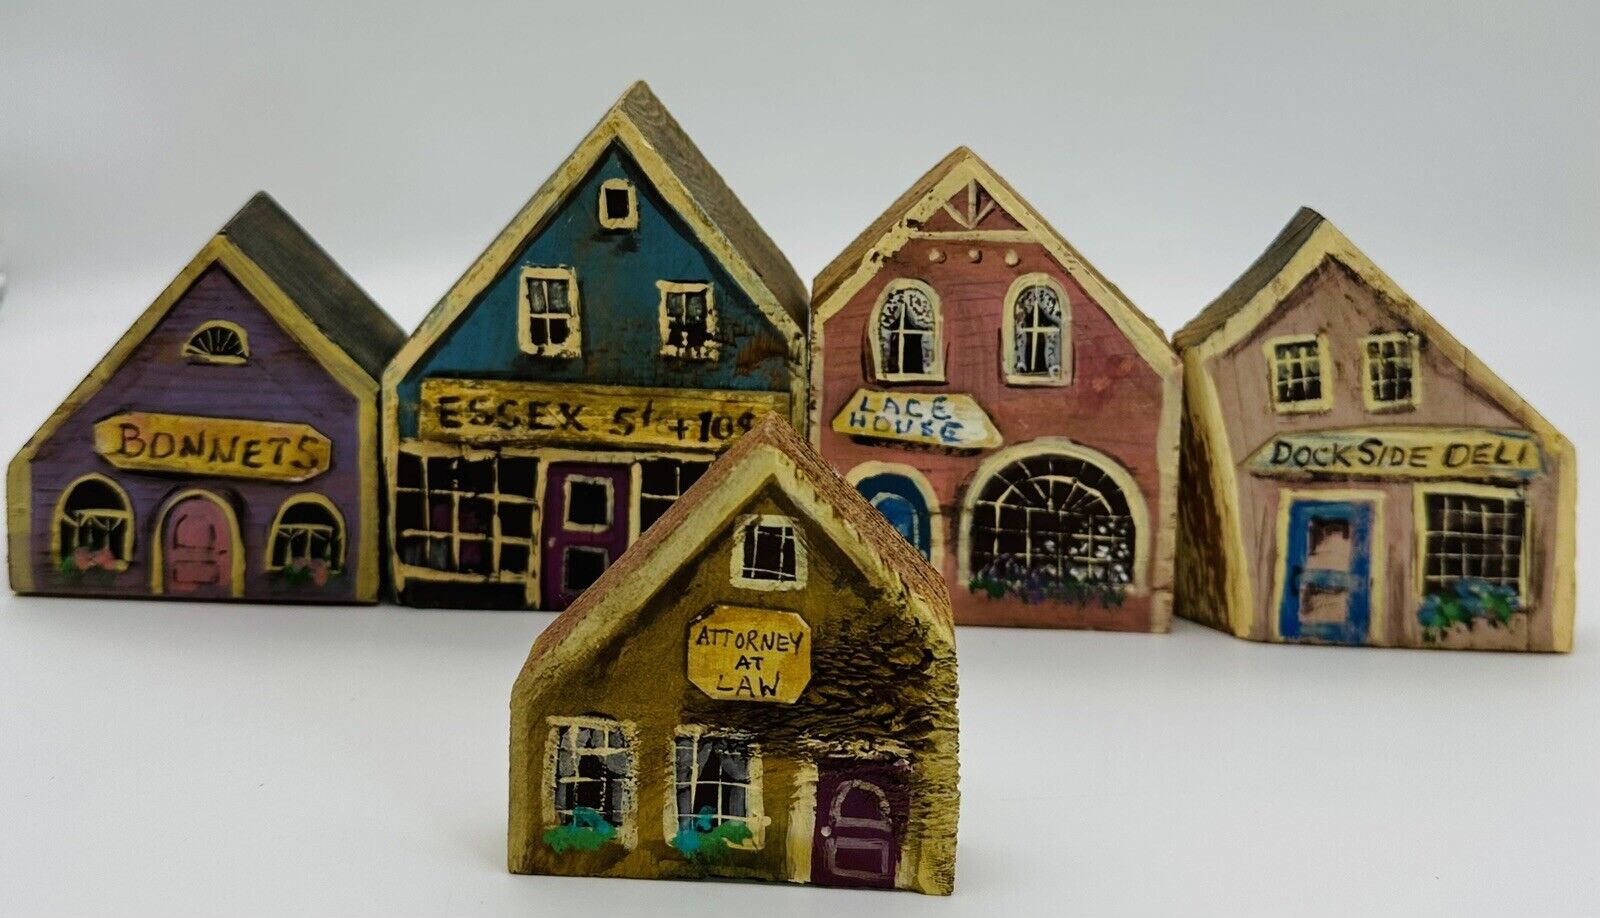 VINTAGE 80s FOLK ART CONNECTICUT VILLAGE BUILDINGS HANDCRAFTED BY NORMA FRANCINI